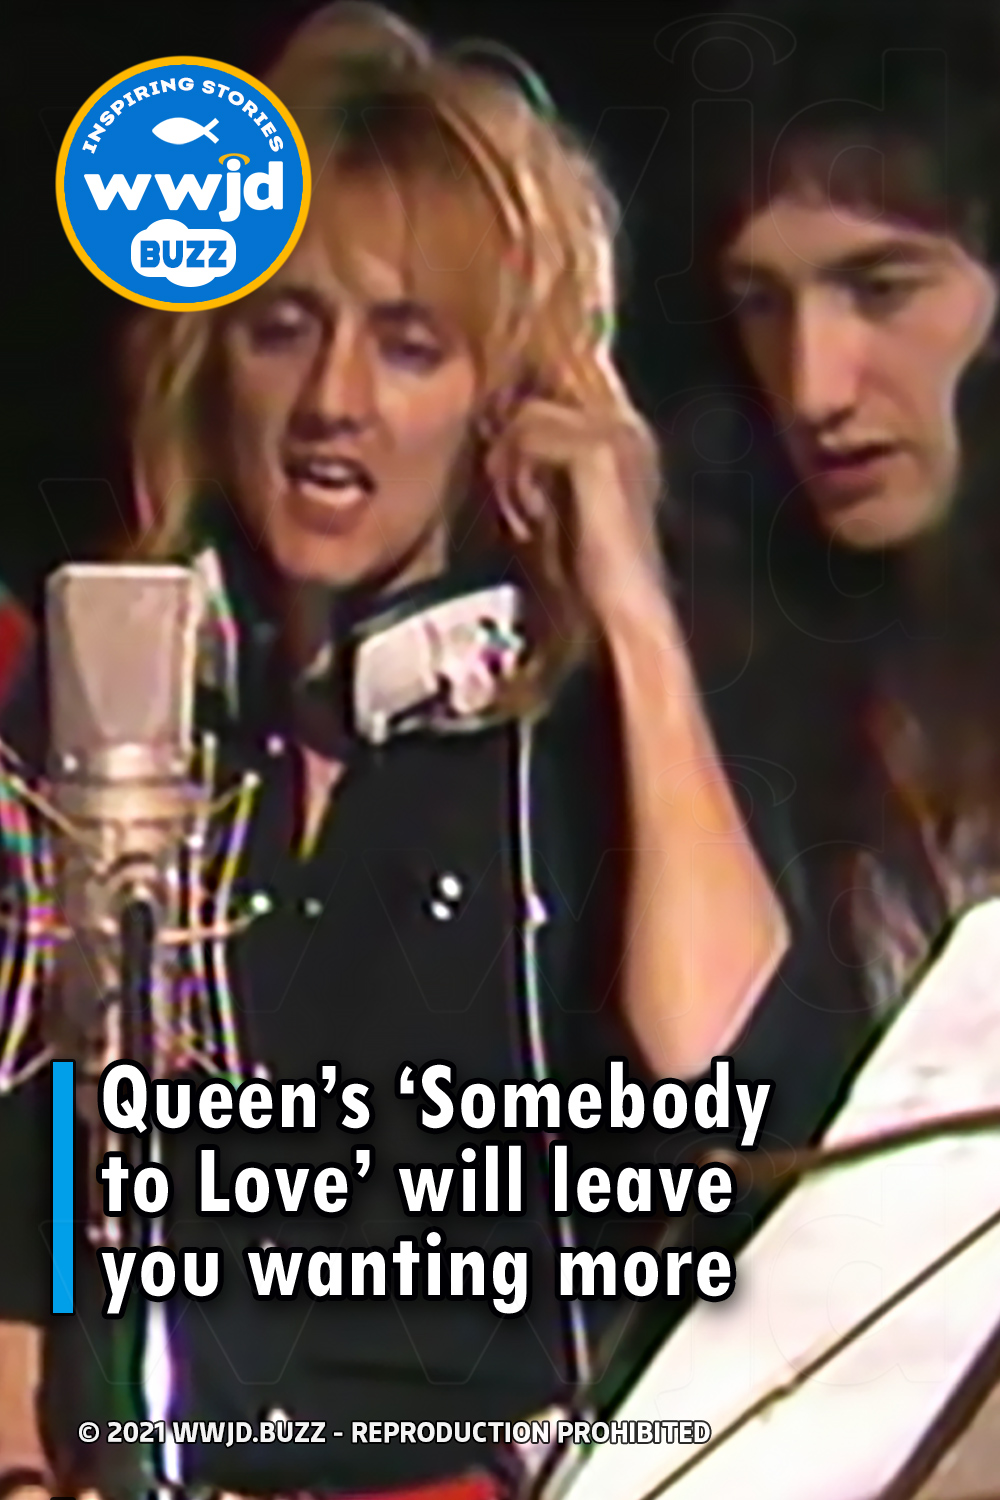 Queen’s ‘Somebody to Love’ will leave you wanting more